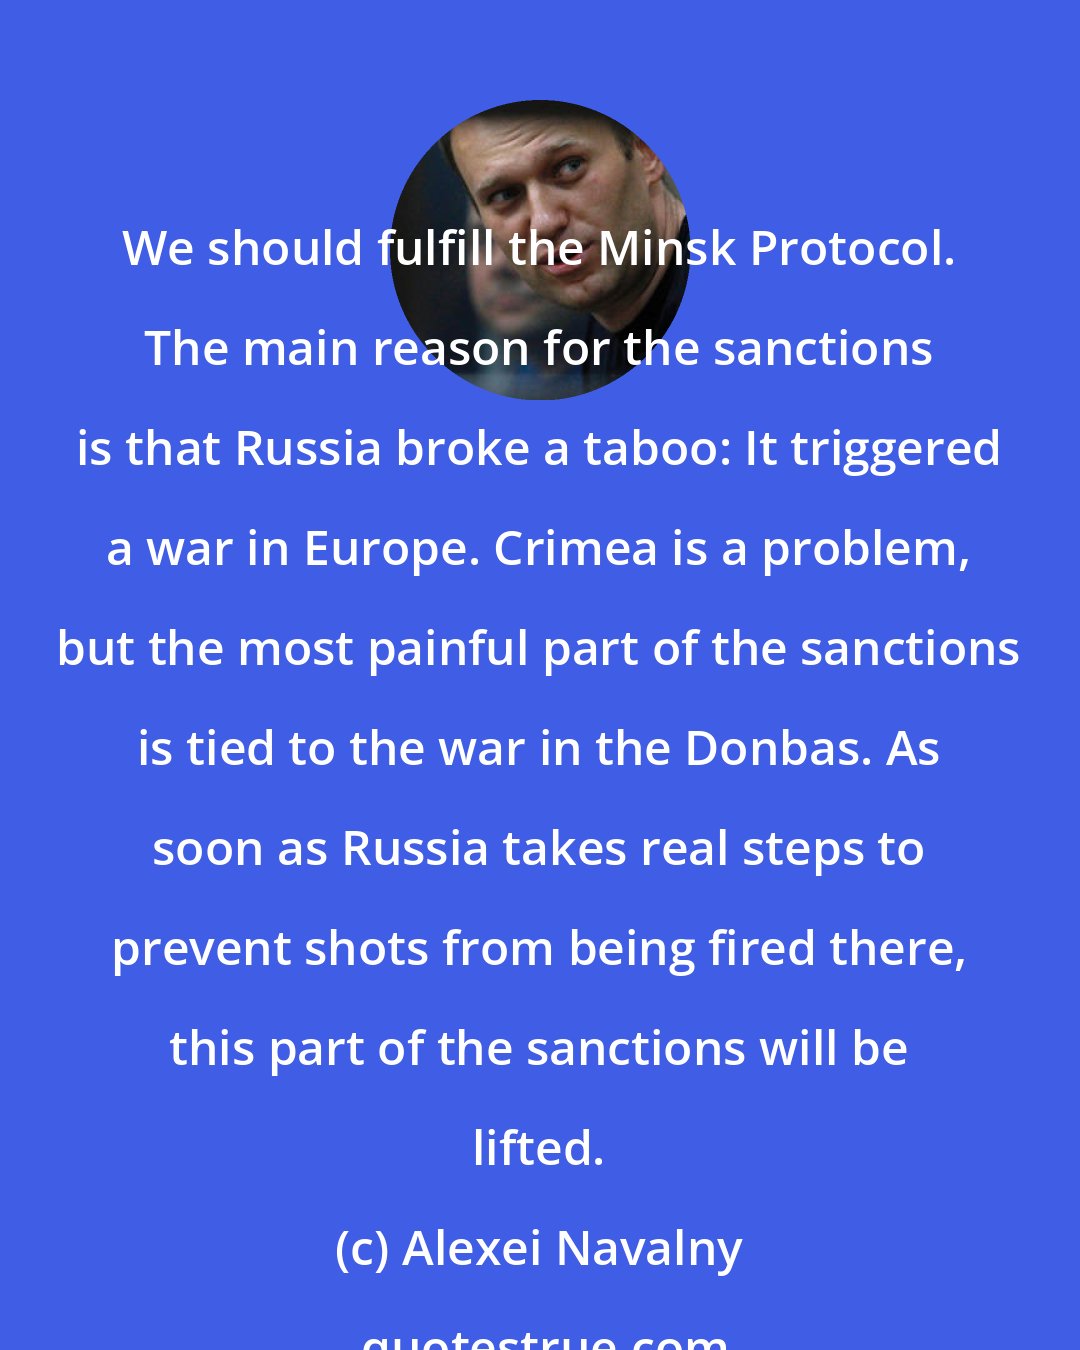 Alexei Navalny: We should fulfill the Minsk Protocol. The main reason for the sanctions is that Russia broke a taboo: It triggered a war in Europe. Crimea is a problem, but the most painful part of the sanctions is tied to the war in the Donbas. As soon as Russia takes real steps to prevent shots from being fired there, this part of the sanctions will be lifted.